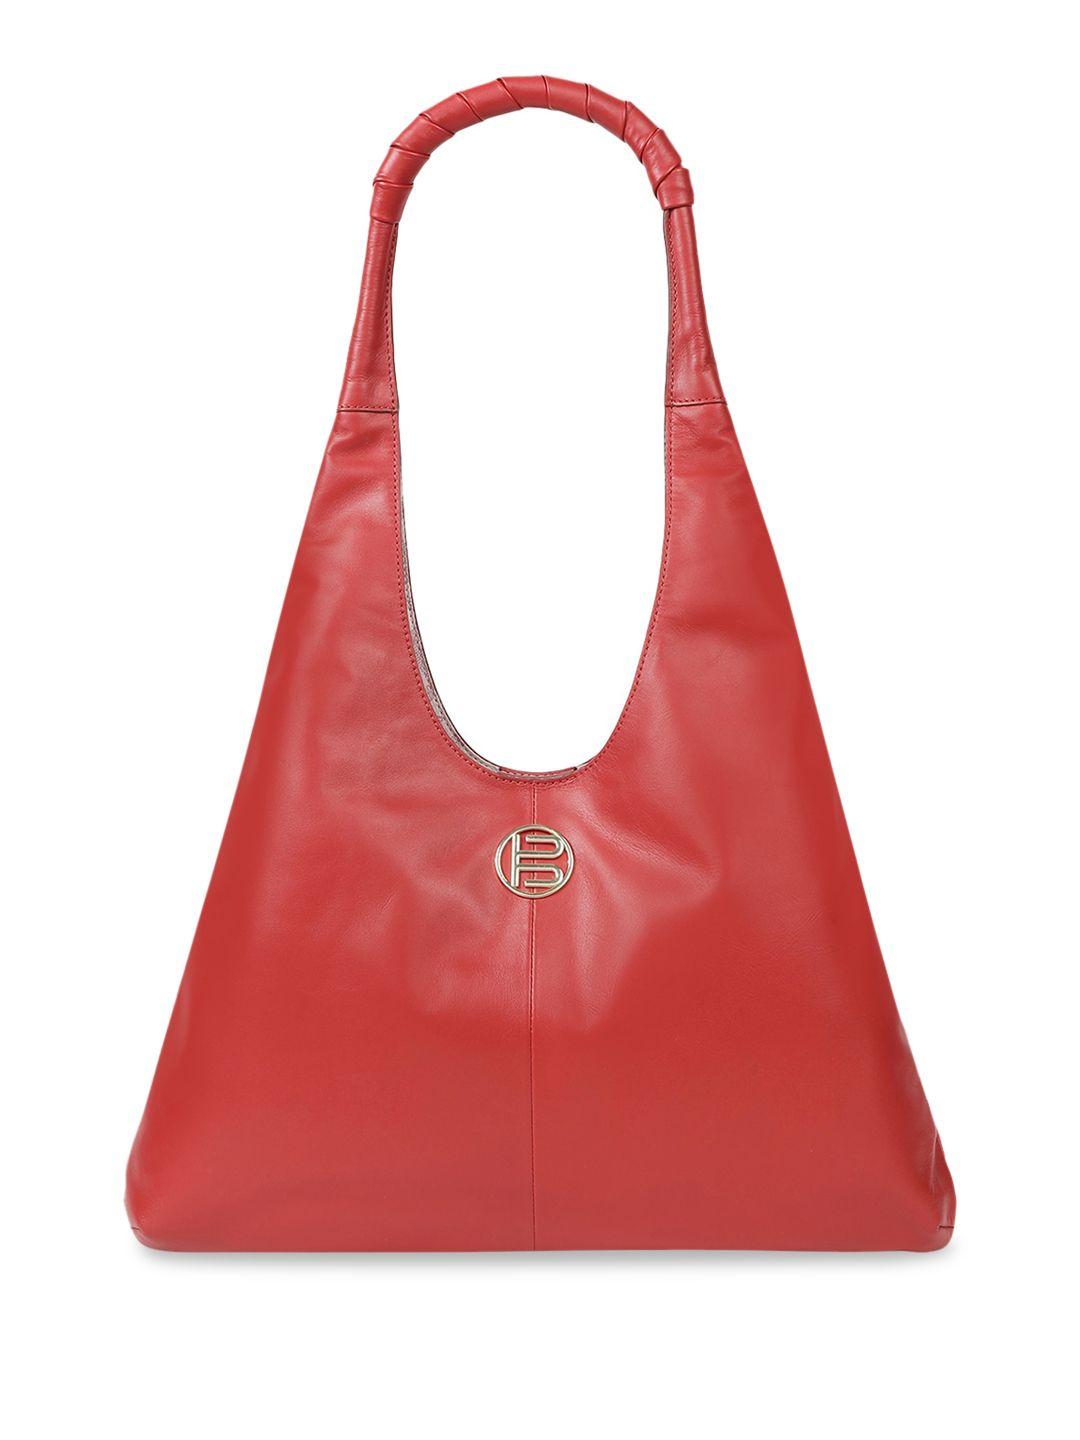 bagatt textured leather structured hobo bag